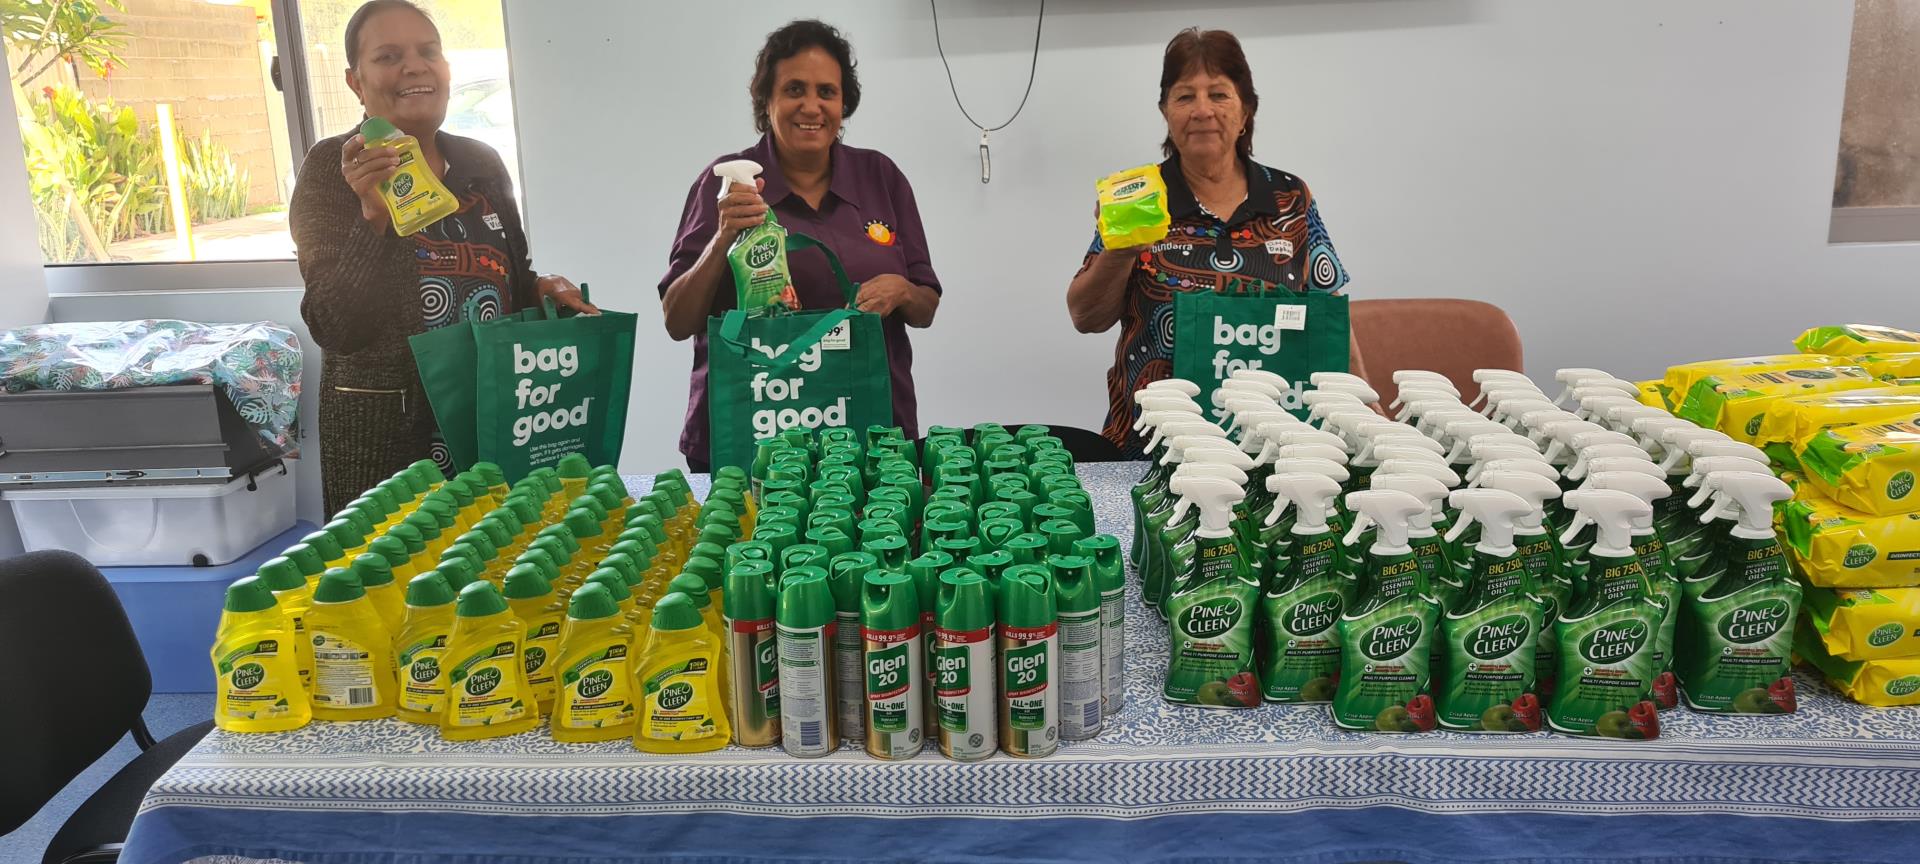 Hygiene packs donated to support community